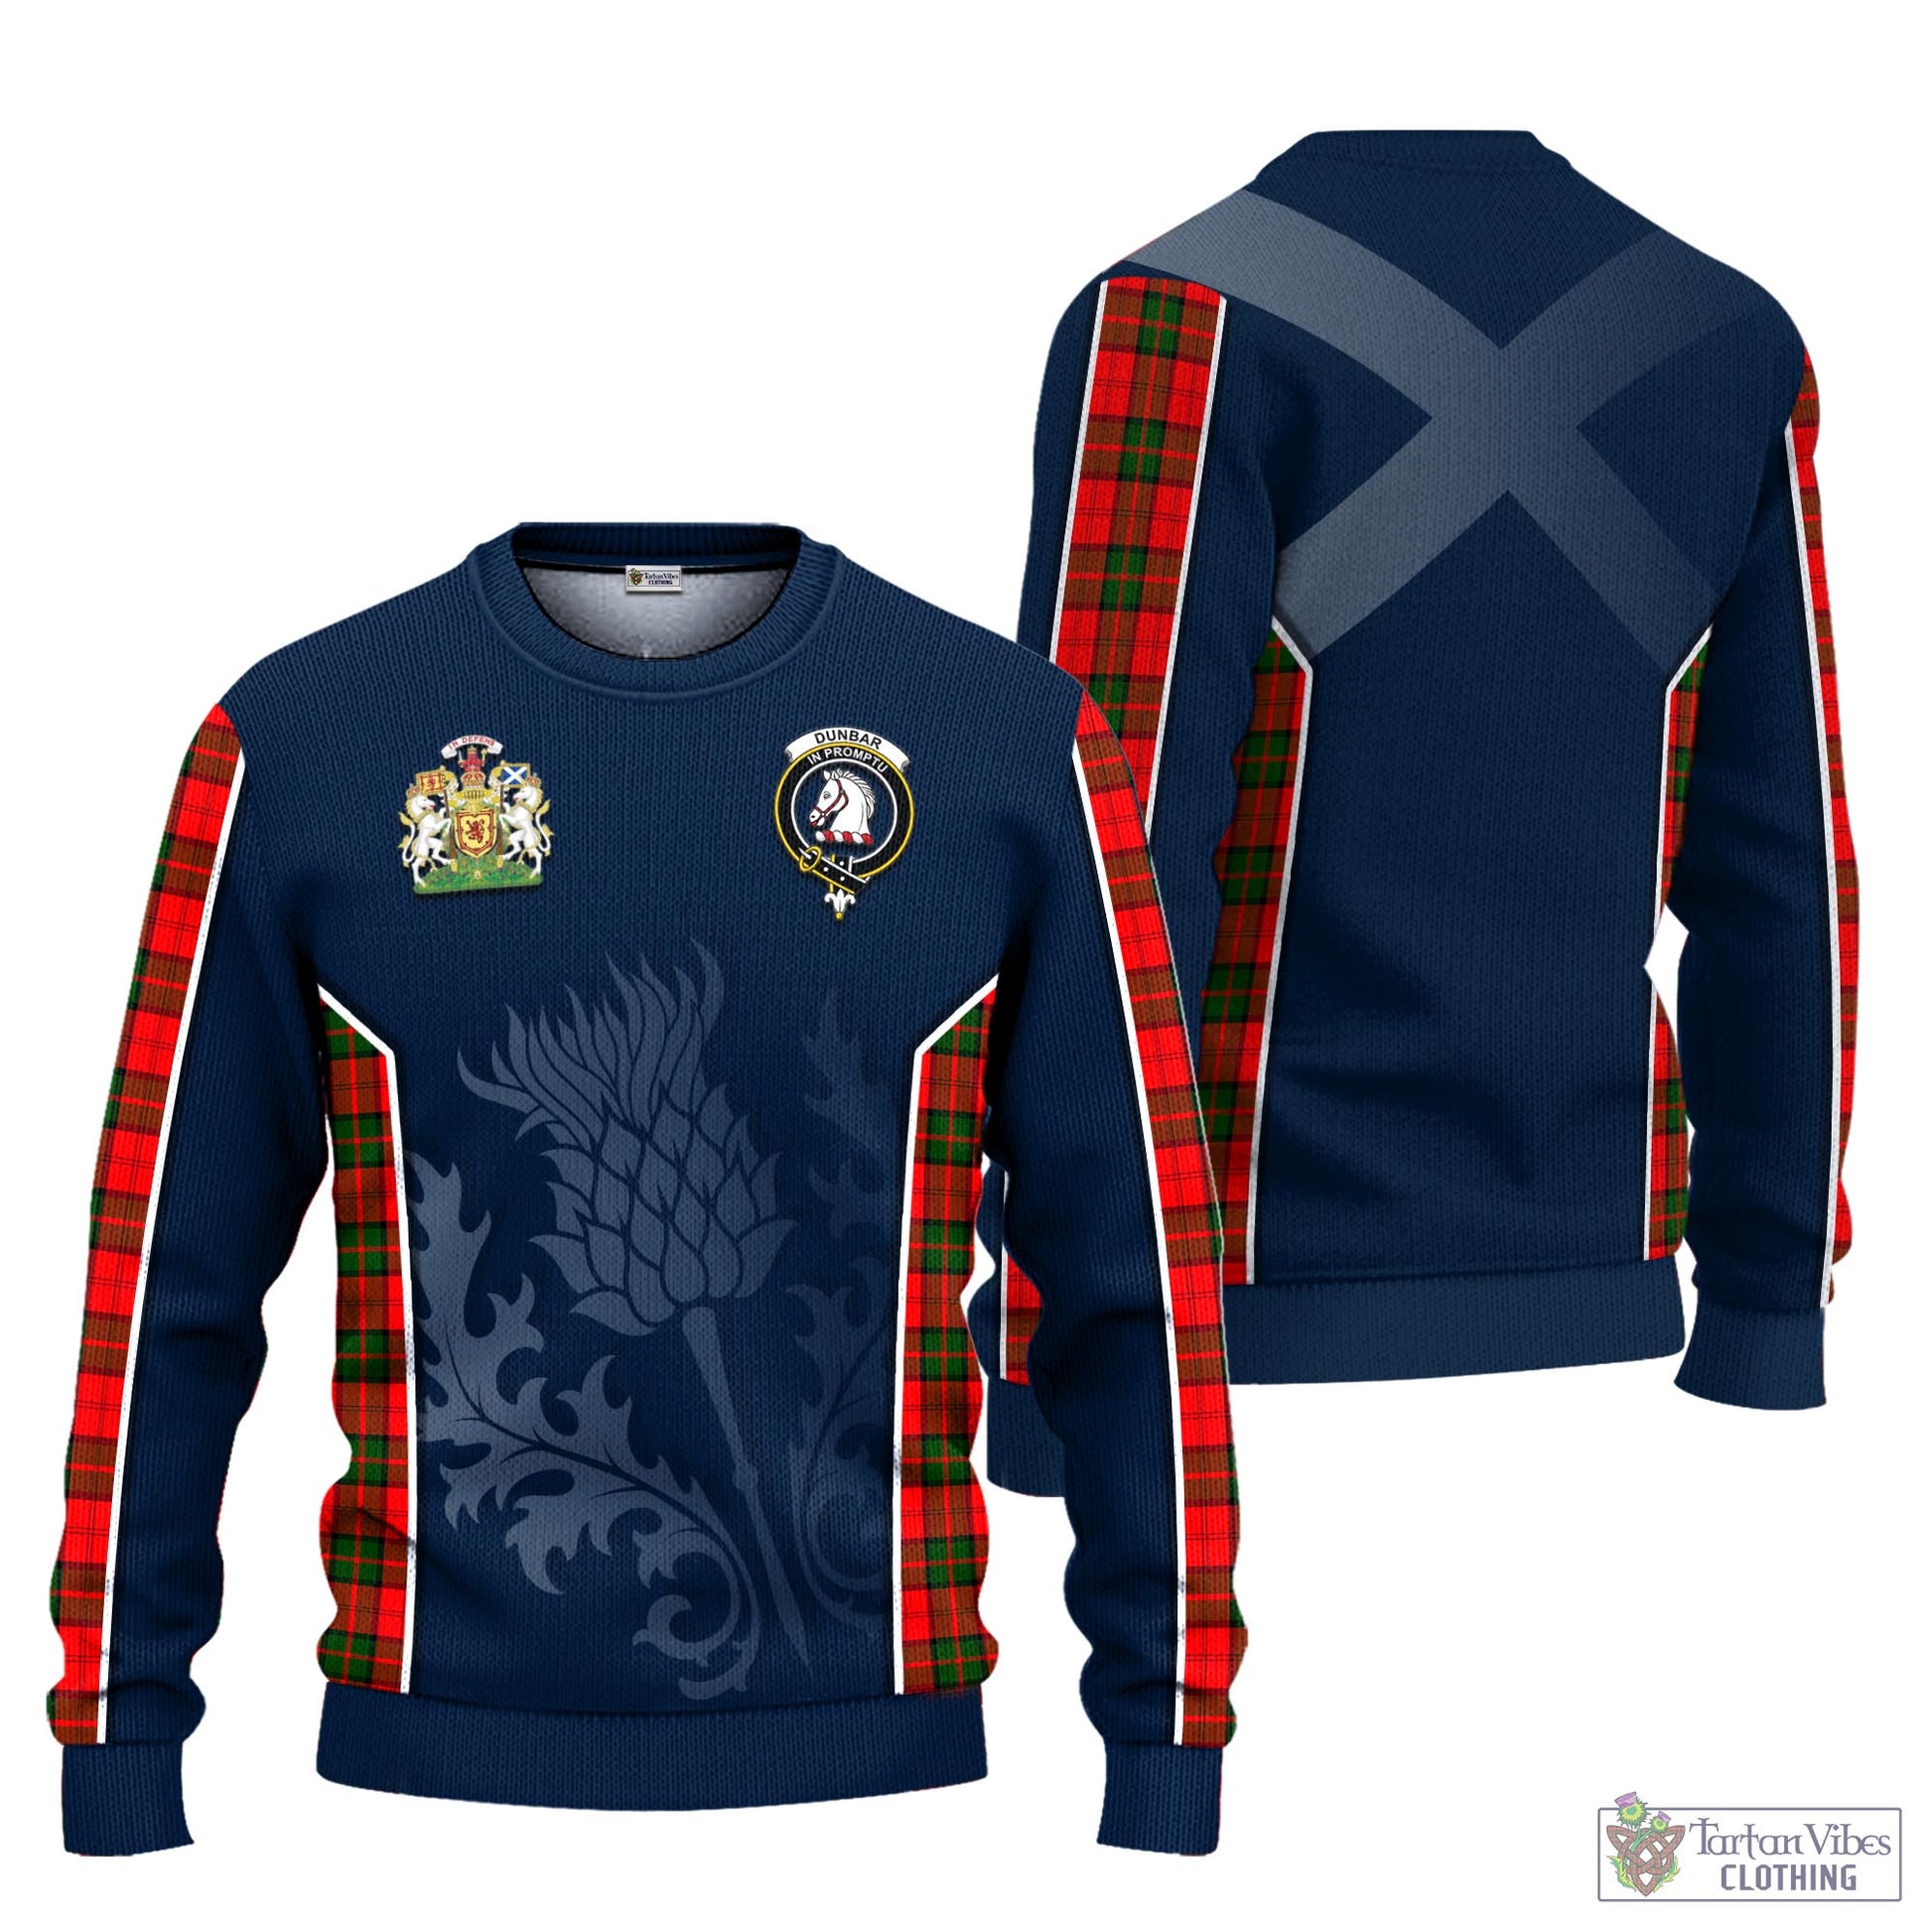 Tartan Vibes Clothing Dunbar Modern Tartan Knitted Sweatshirt with Family Crest and Scottish Thistle Vibes Sport Style